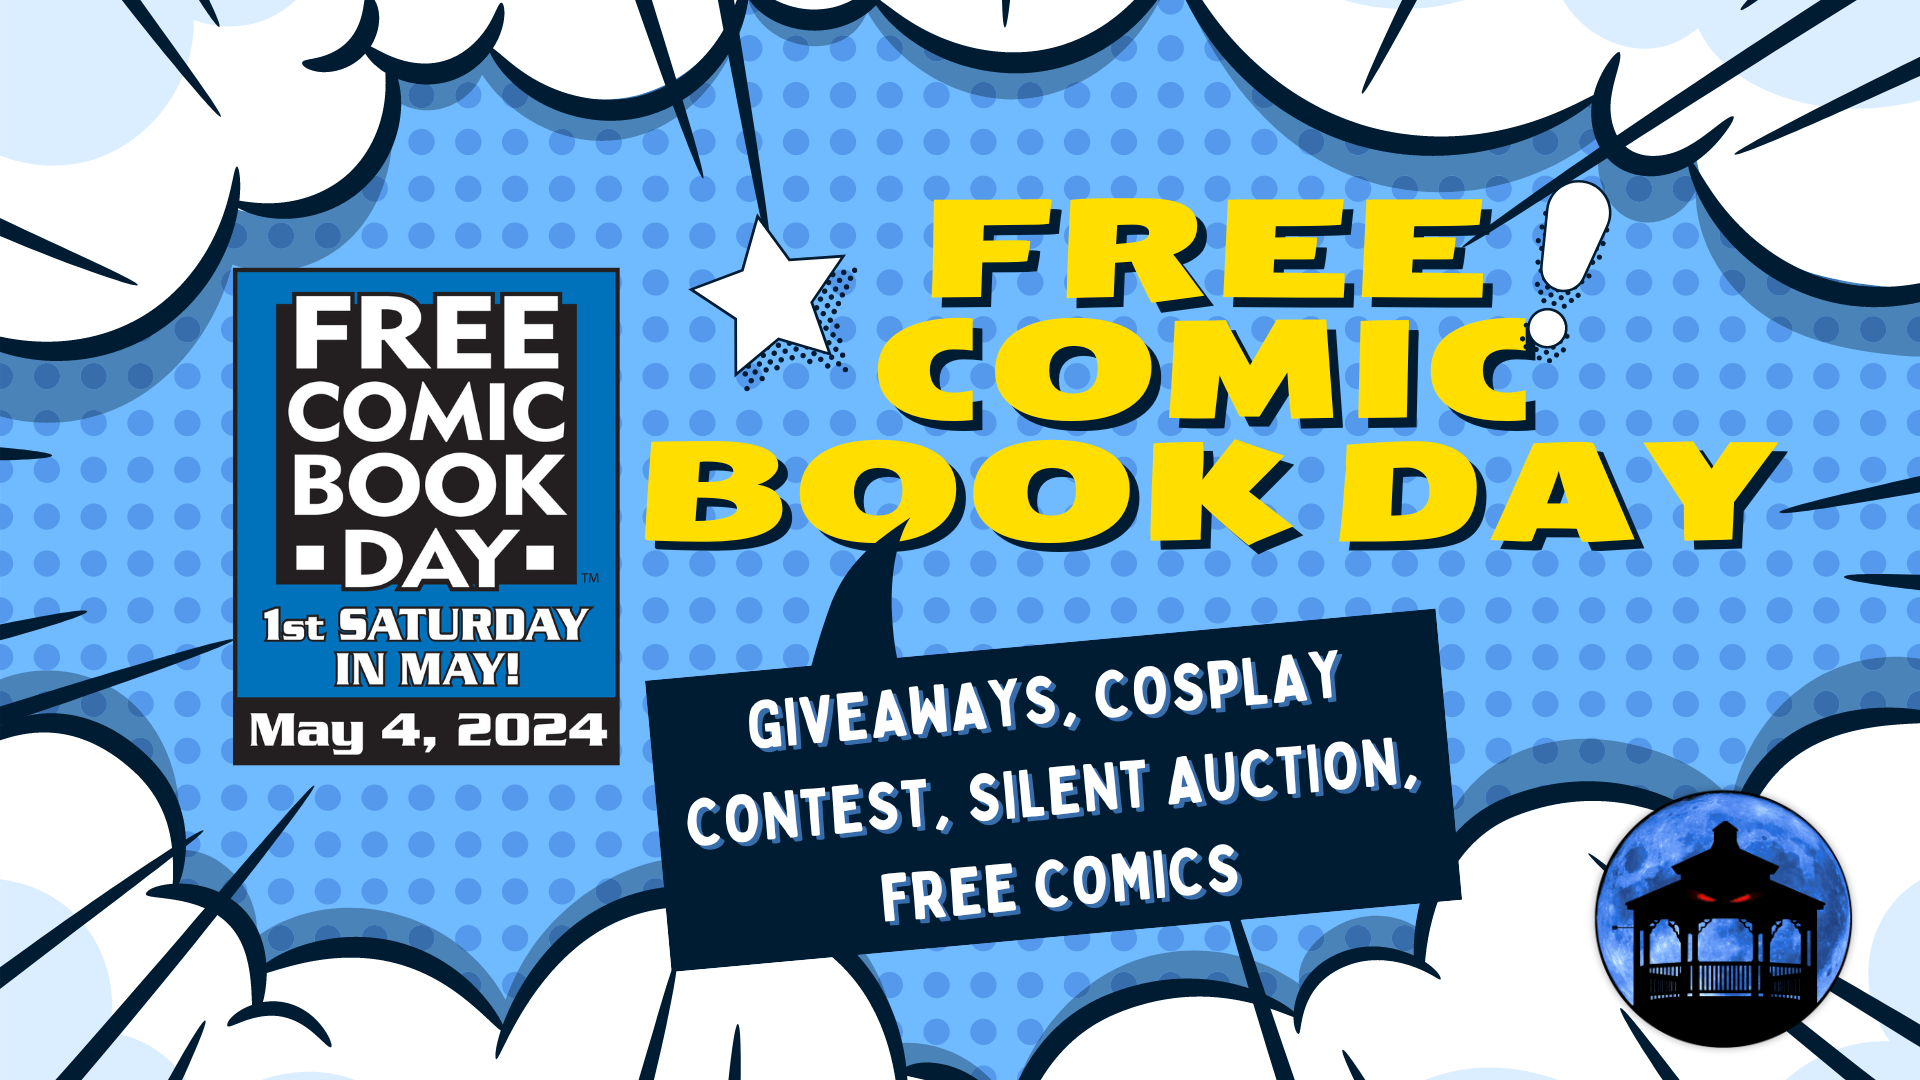 Free comic Book day with giveaways, a costume contest, a silent auction, and, of course, FREE comics